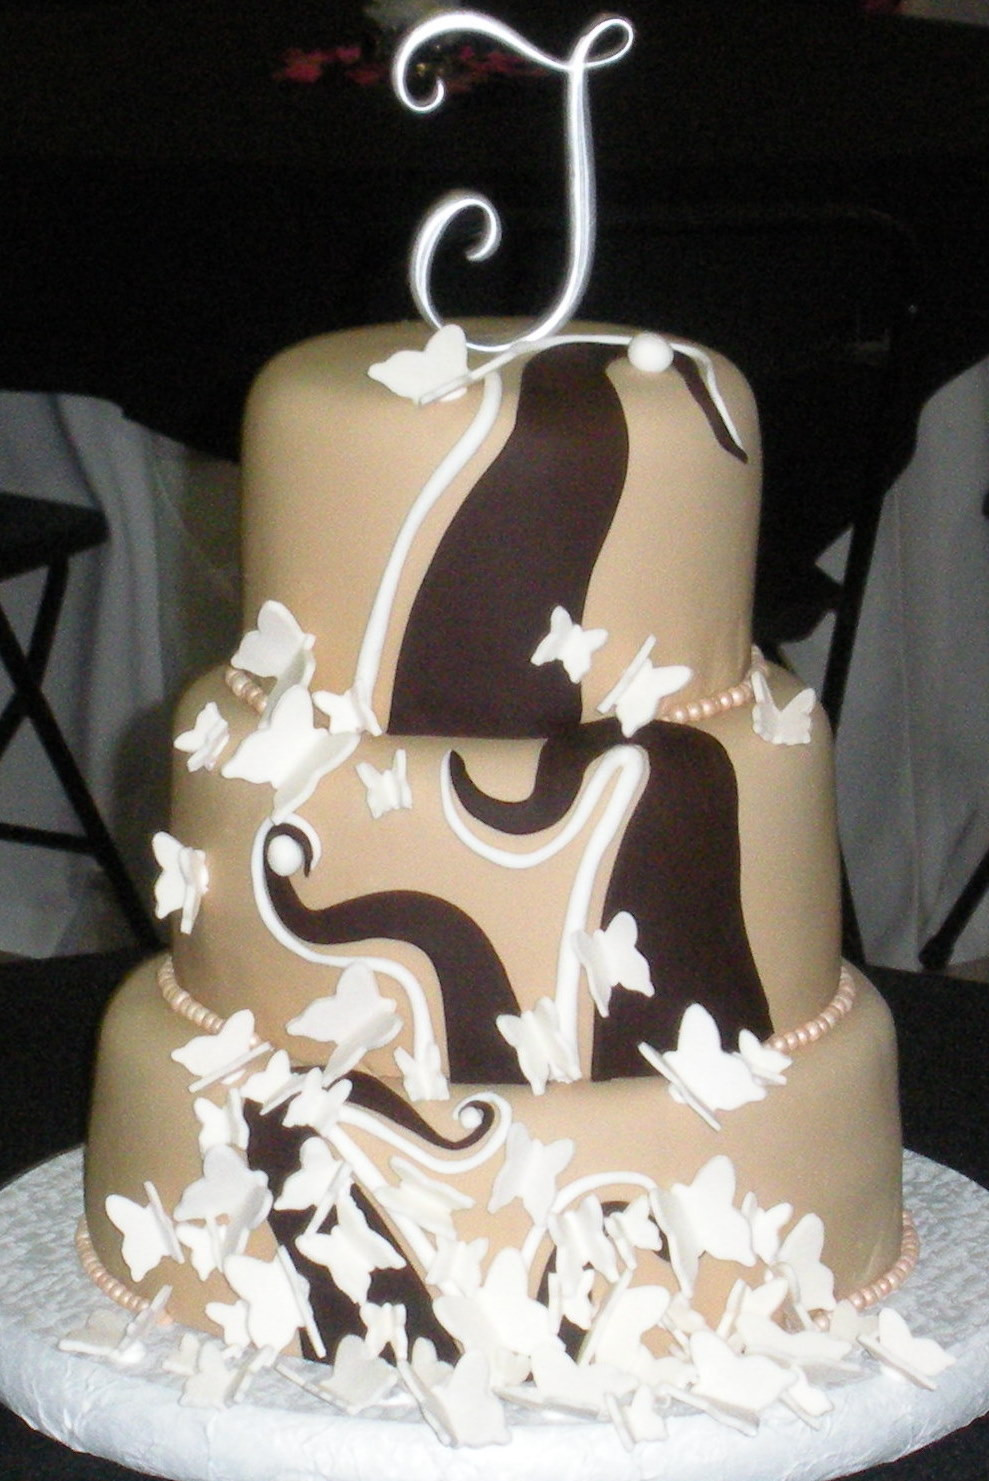 Chocolate And White Wedding Cake
 New trends for custom fondant wedding cakes in 2010